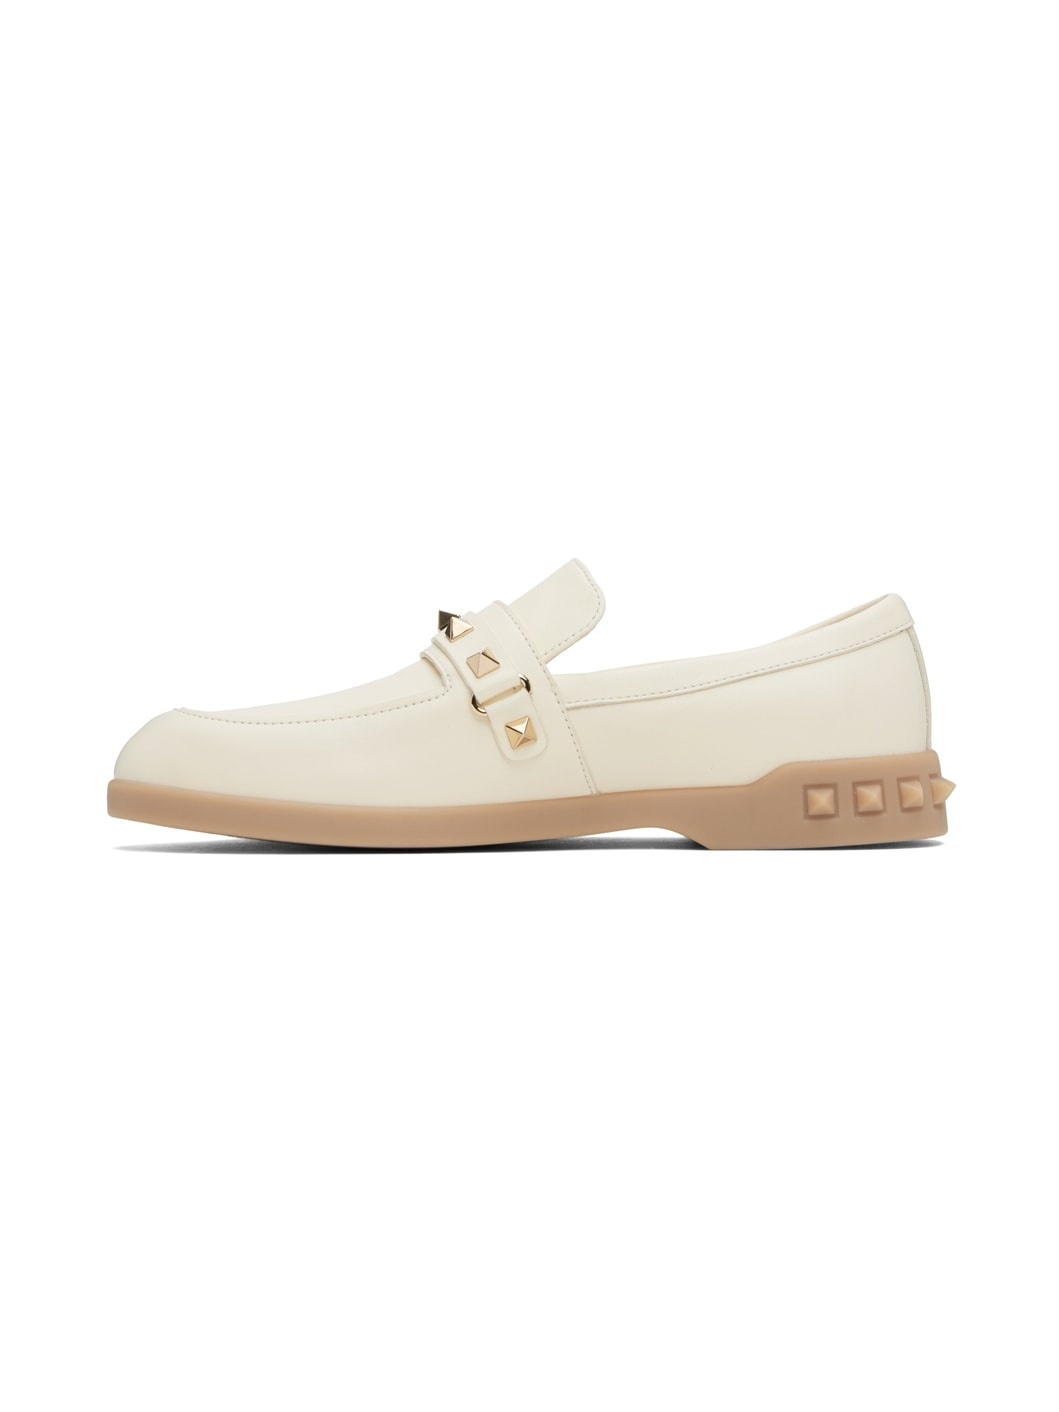 White Leisure Flows Loafers - 3